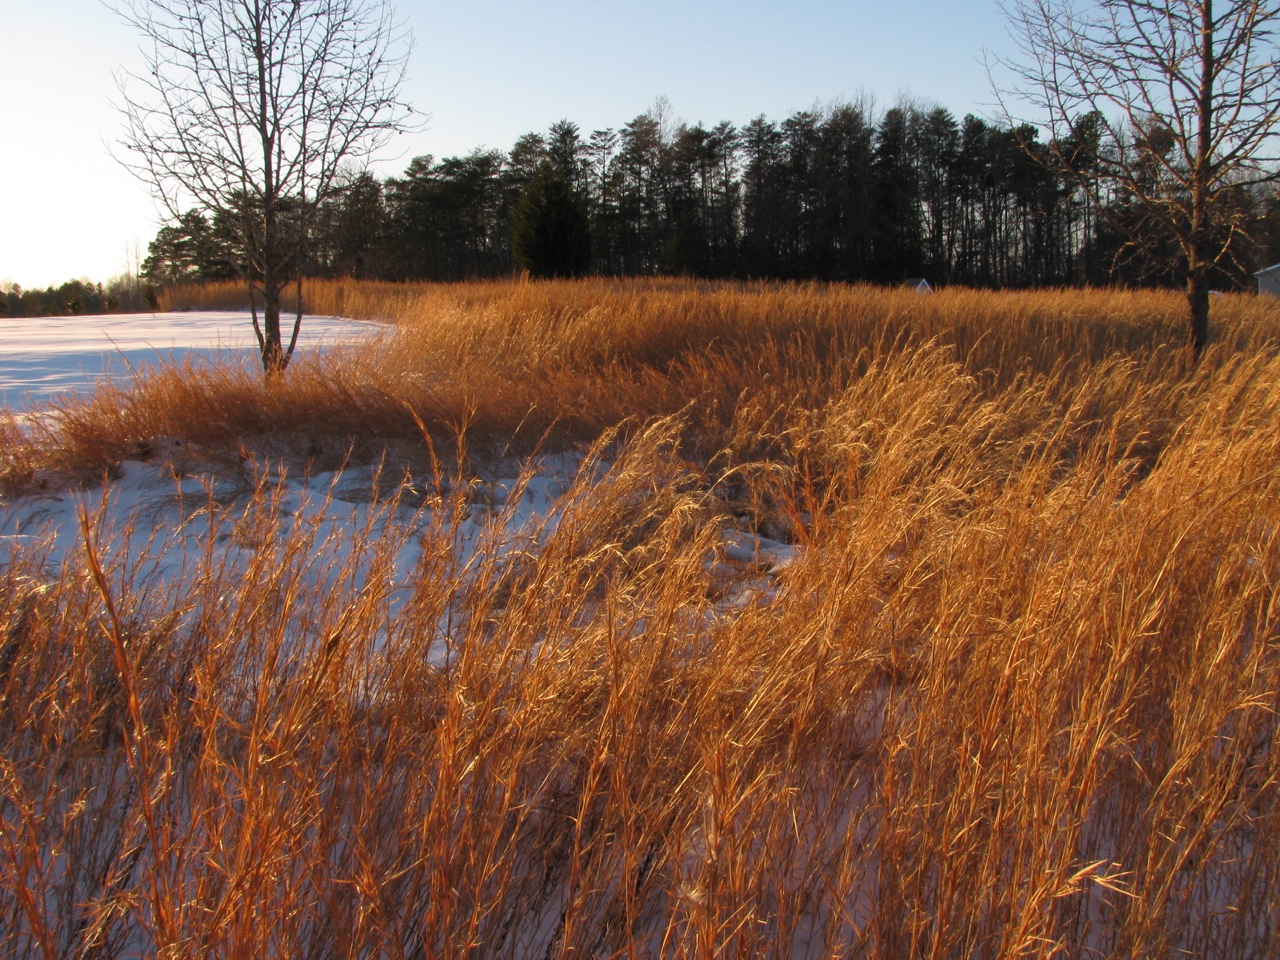 The Scientific Name is Andropogon virginicus var. virginicus. You will likely hear them called Old-field Broomstraw, Broomsedge, Broomsedge Bluestem, Sedge Grass, Sage Grass. This picture shows the Spectacular fall and winter color of Andropogon virginicus var. virginicus